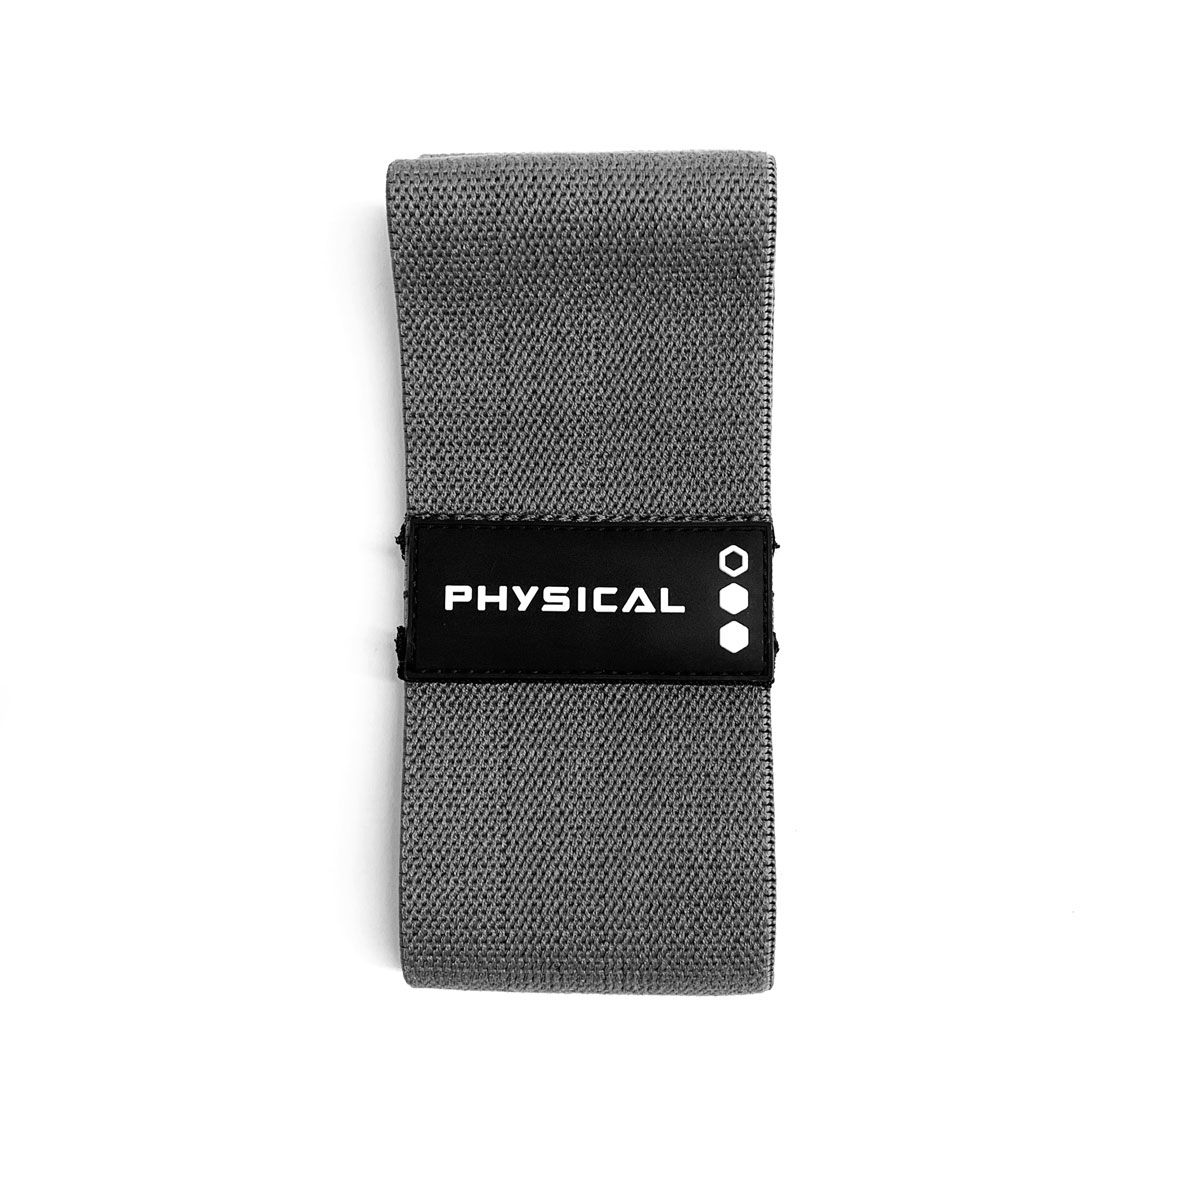 Physical Company Cotton Glute Bands - Set Of 3.